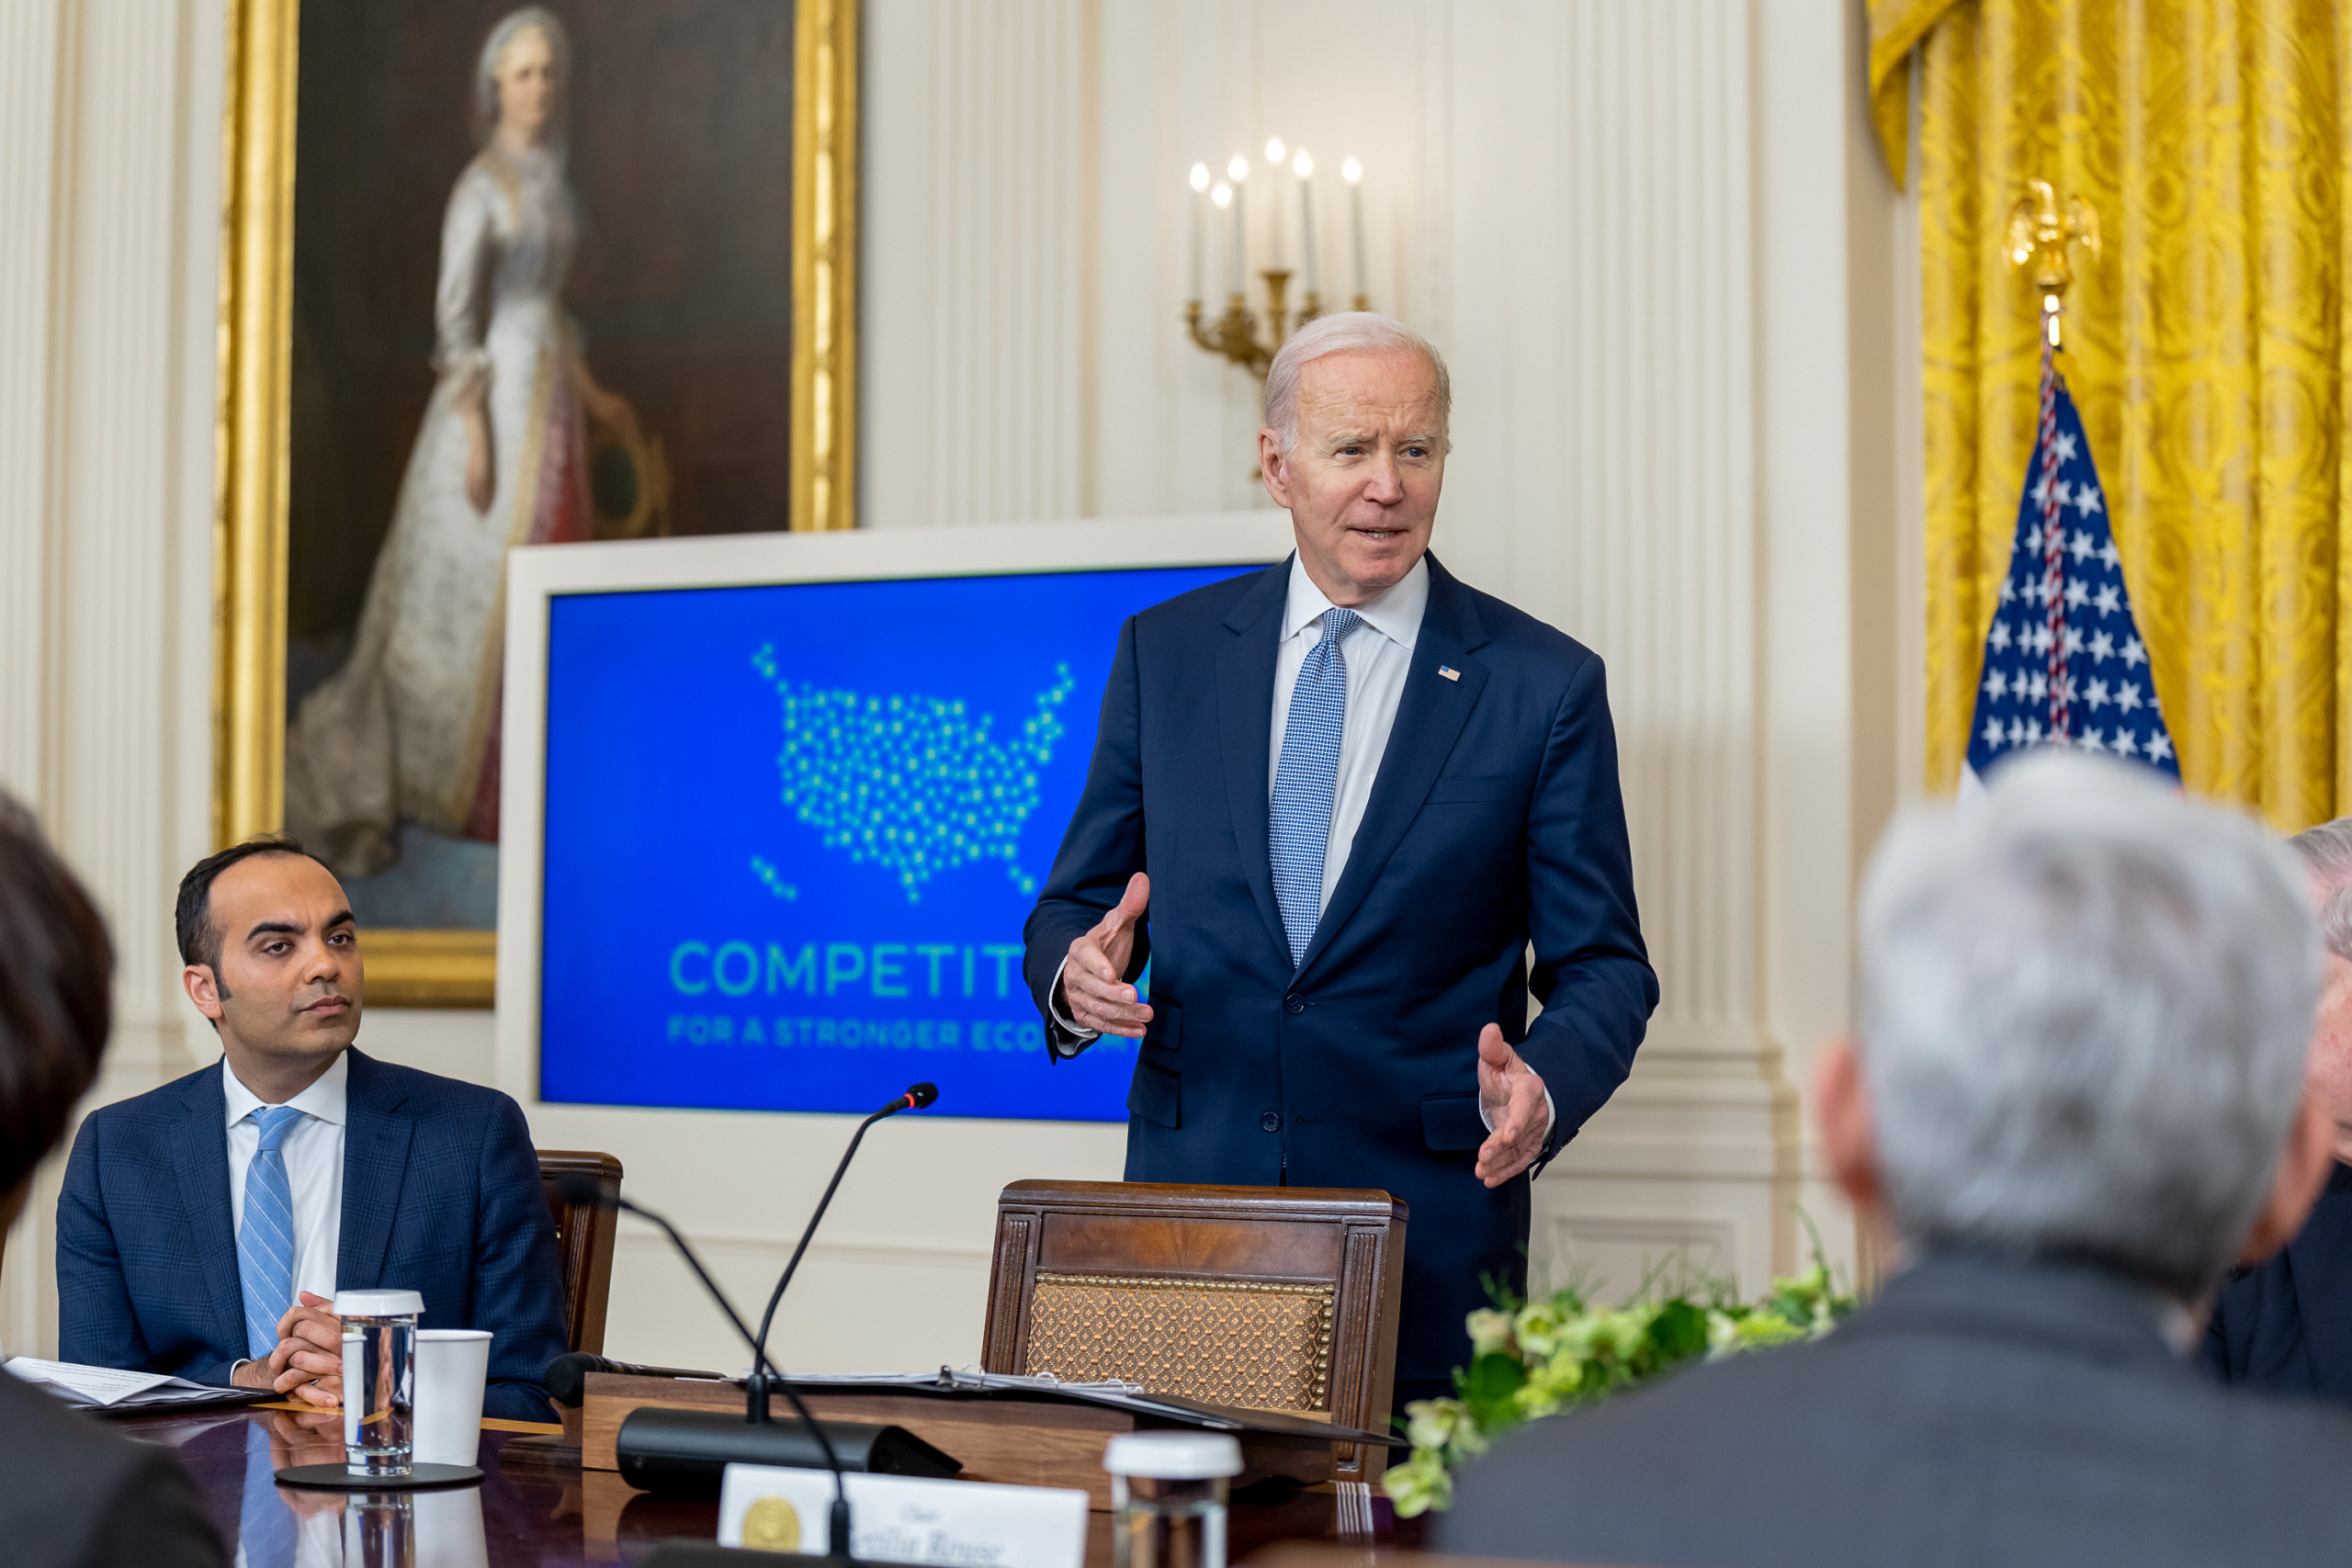 President Biden speaks to the White House Competition Council on February 1, 2023. At left is CFPB director and former FTC commissioner Rohit Chopra.